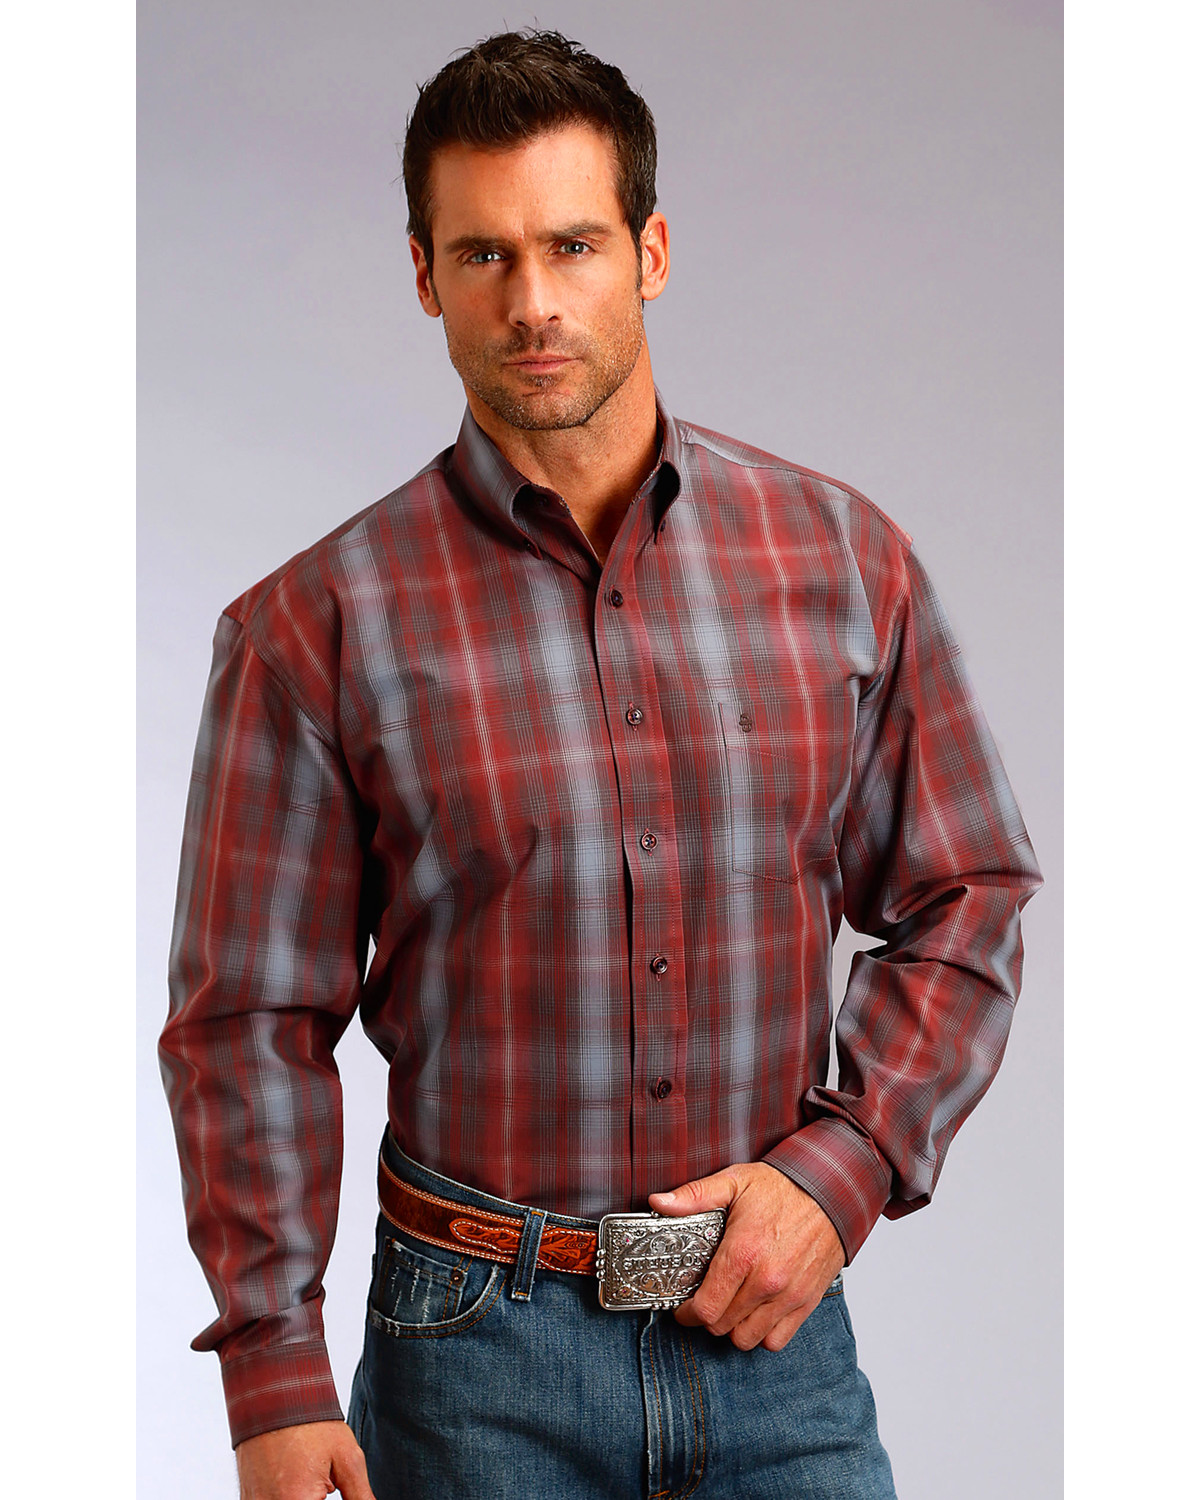 Stetson Men's Burgundy Plaid Long Sleeve Shirt - Country Outfitter